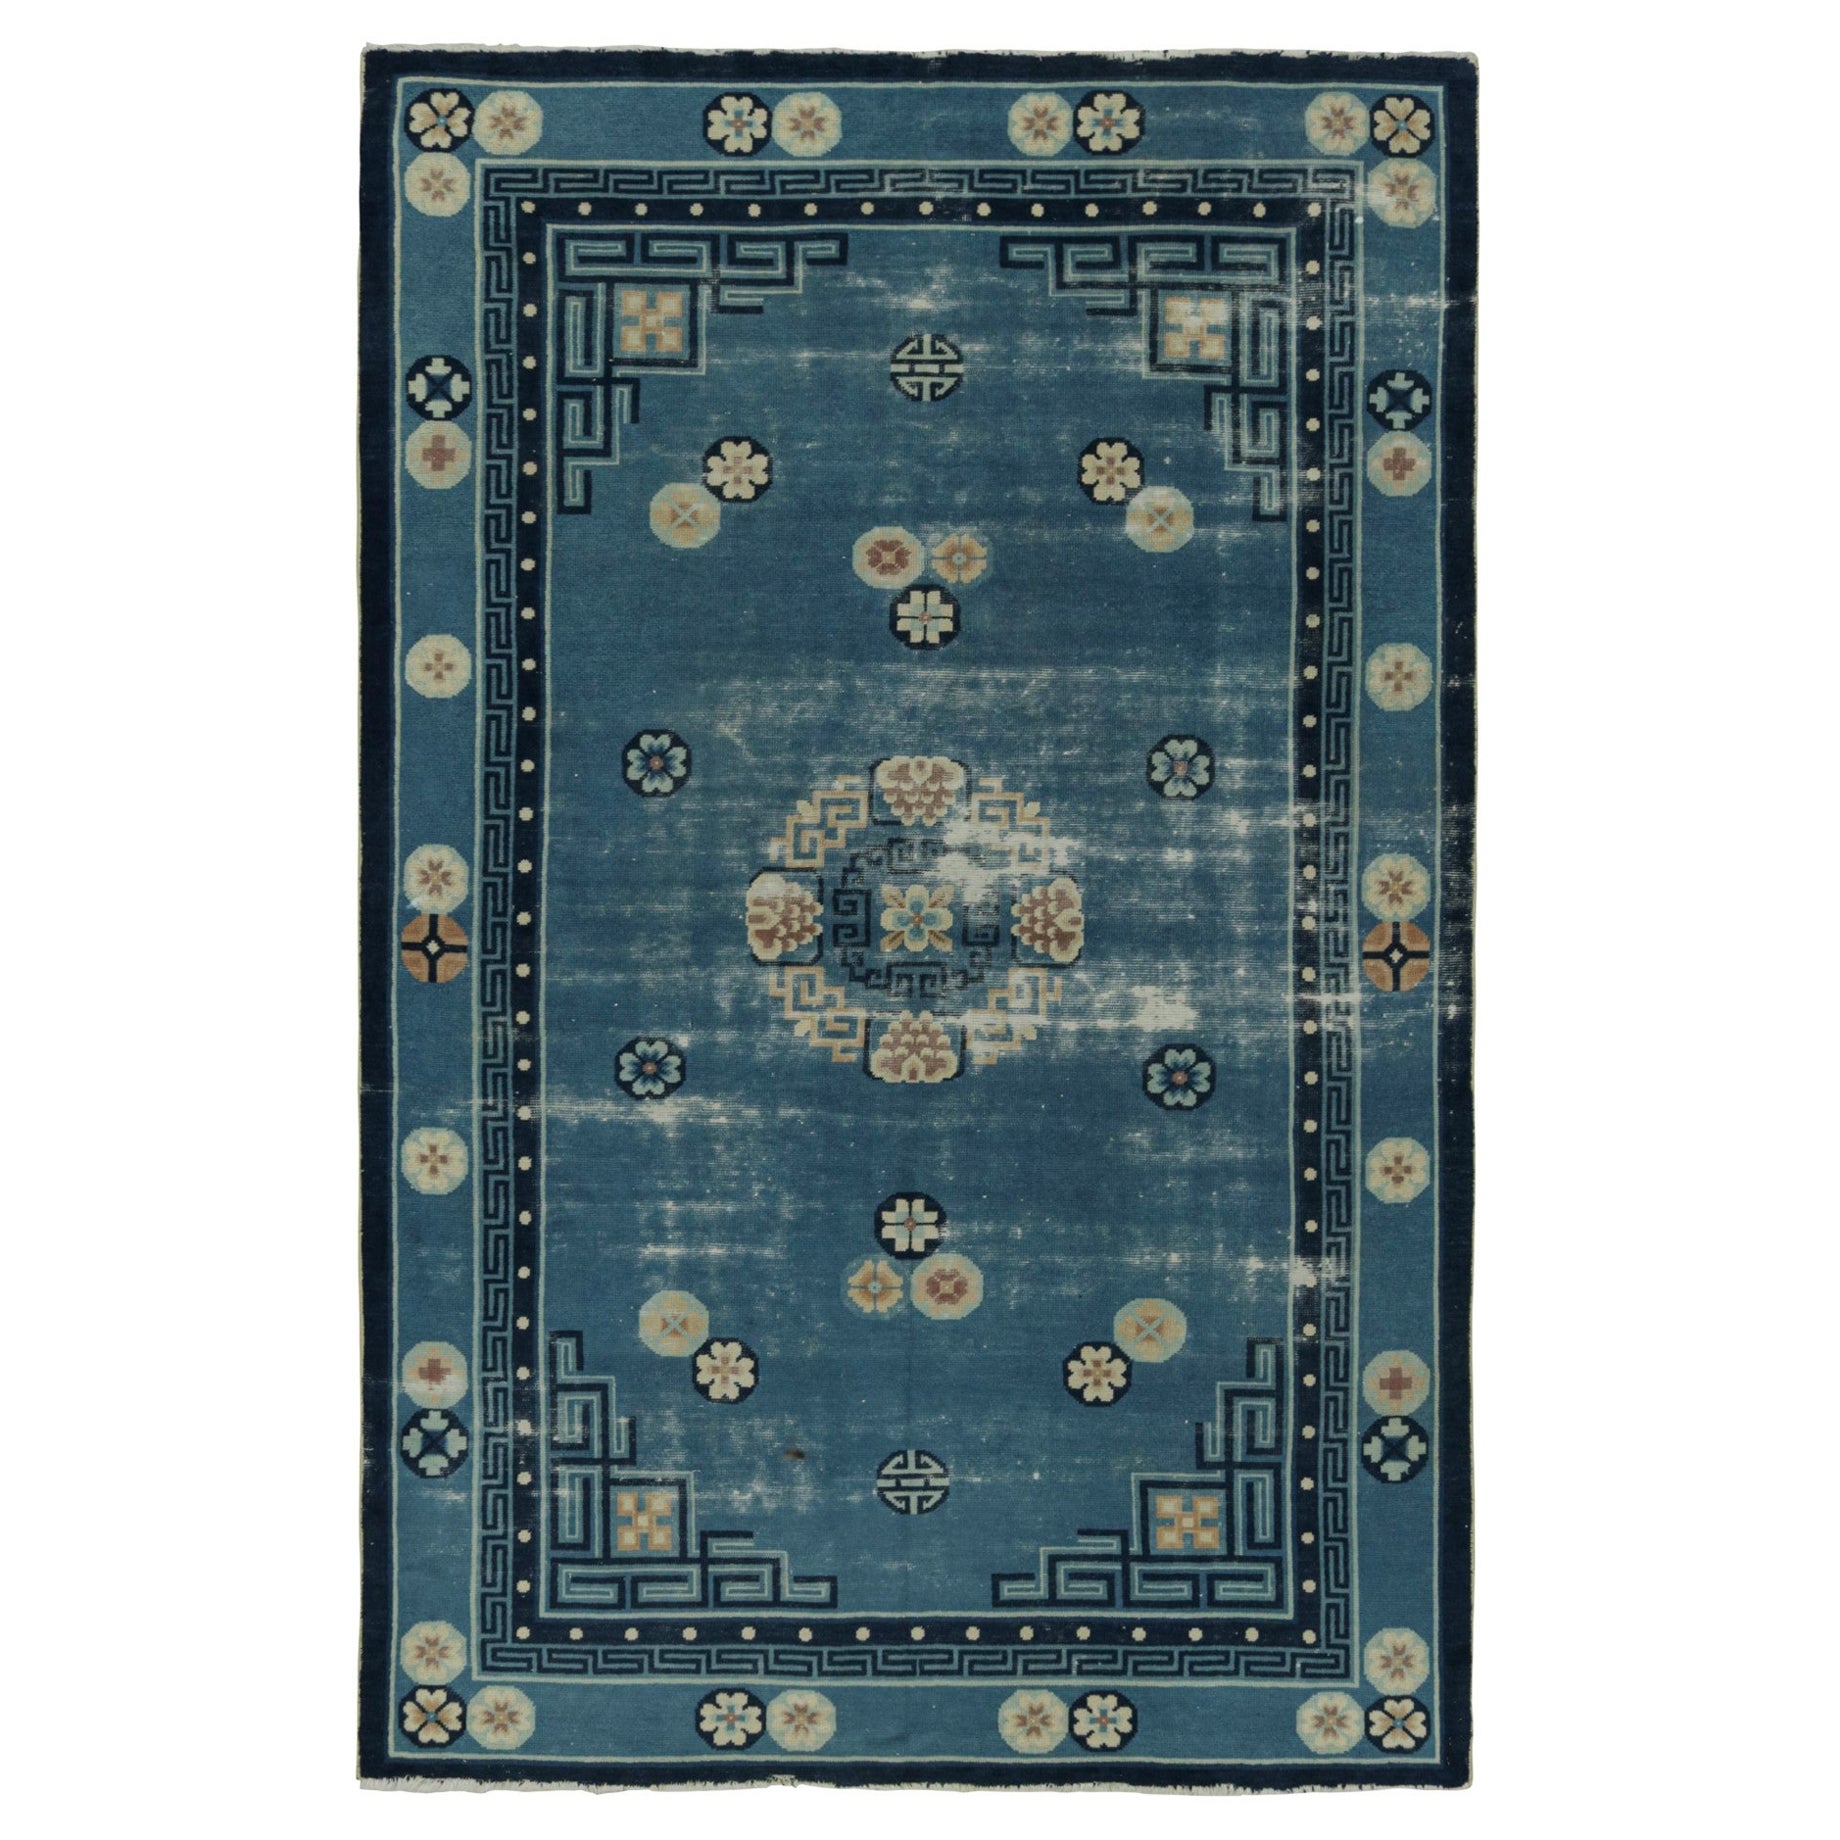 Blue Antique Chinese Peking Art Deco Rug with Floral Patterns, from Rug & Kilim For Sale